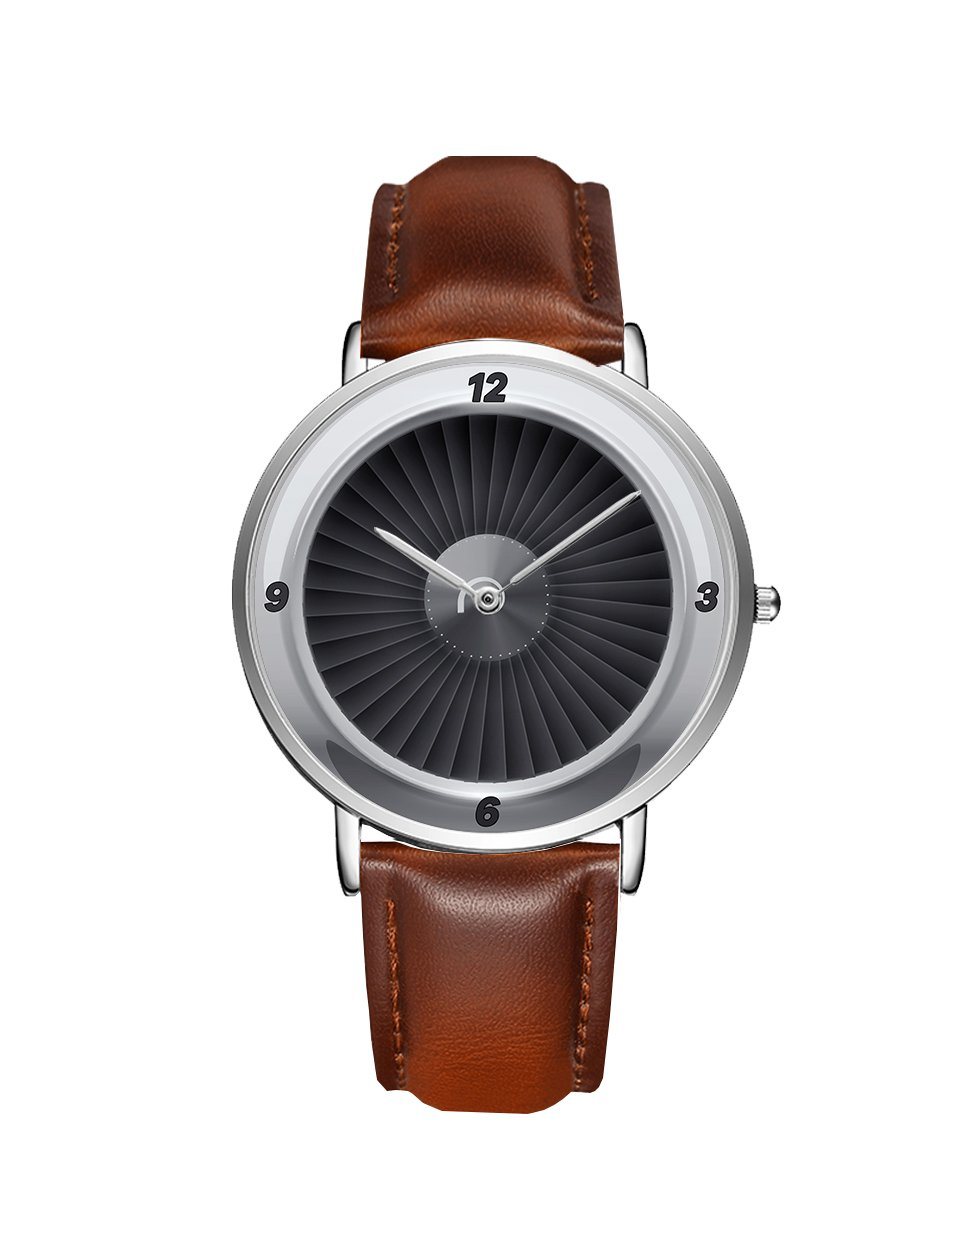 Jet Engine Designed Leather Strap Watches Pilot Eyes Store Silver & Brown Leather Strap 